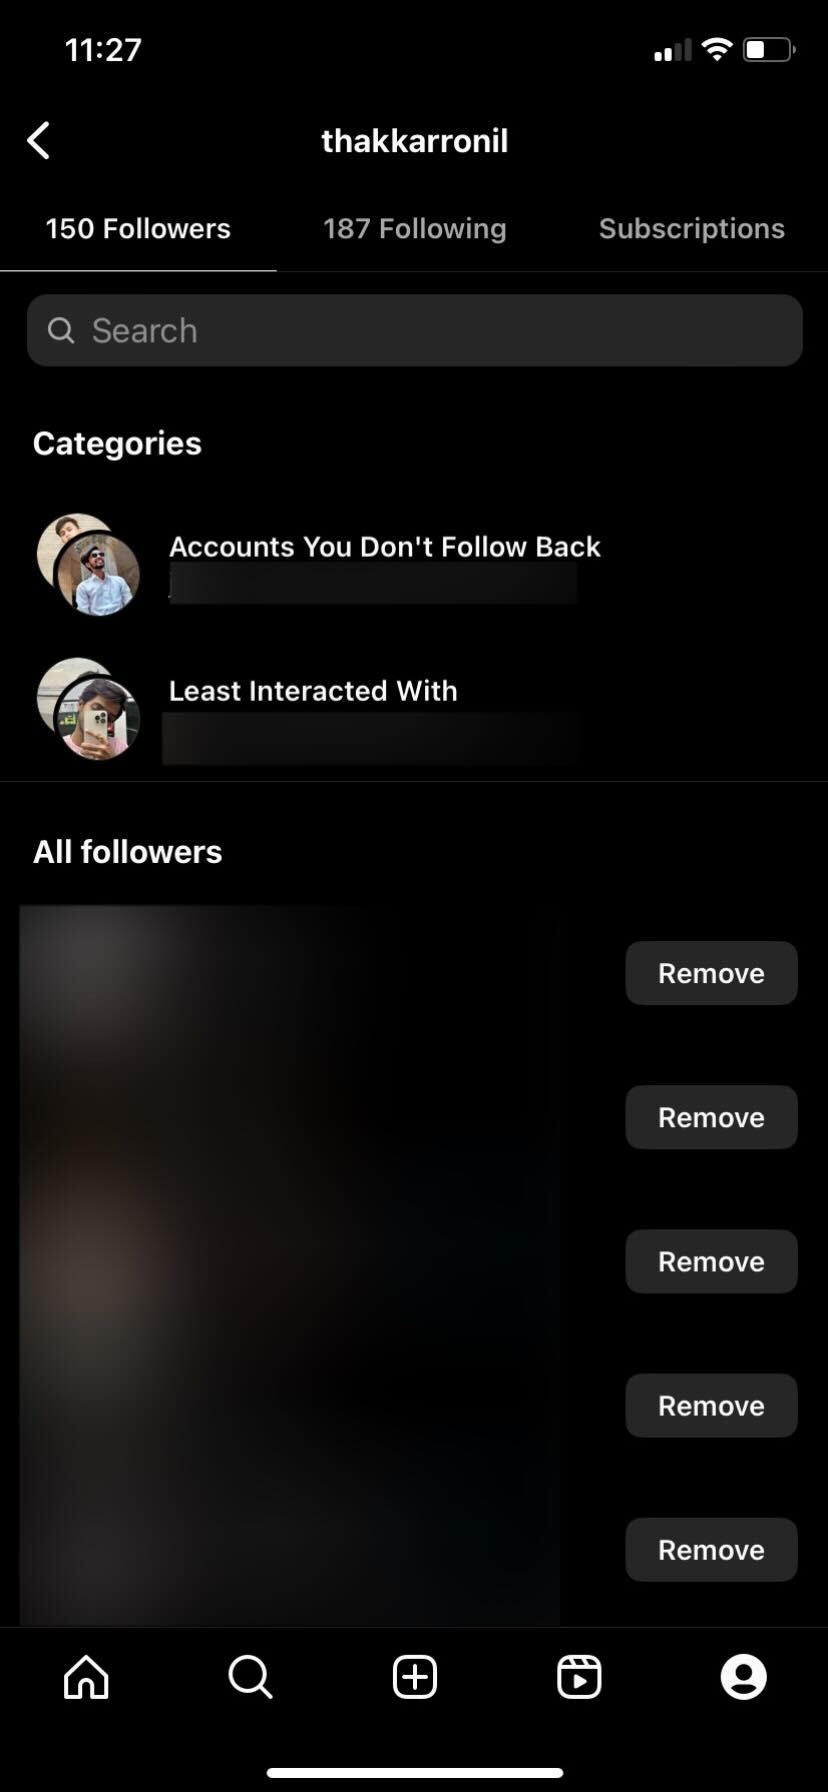 Instagram Accounts You Don’t Follow Back option